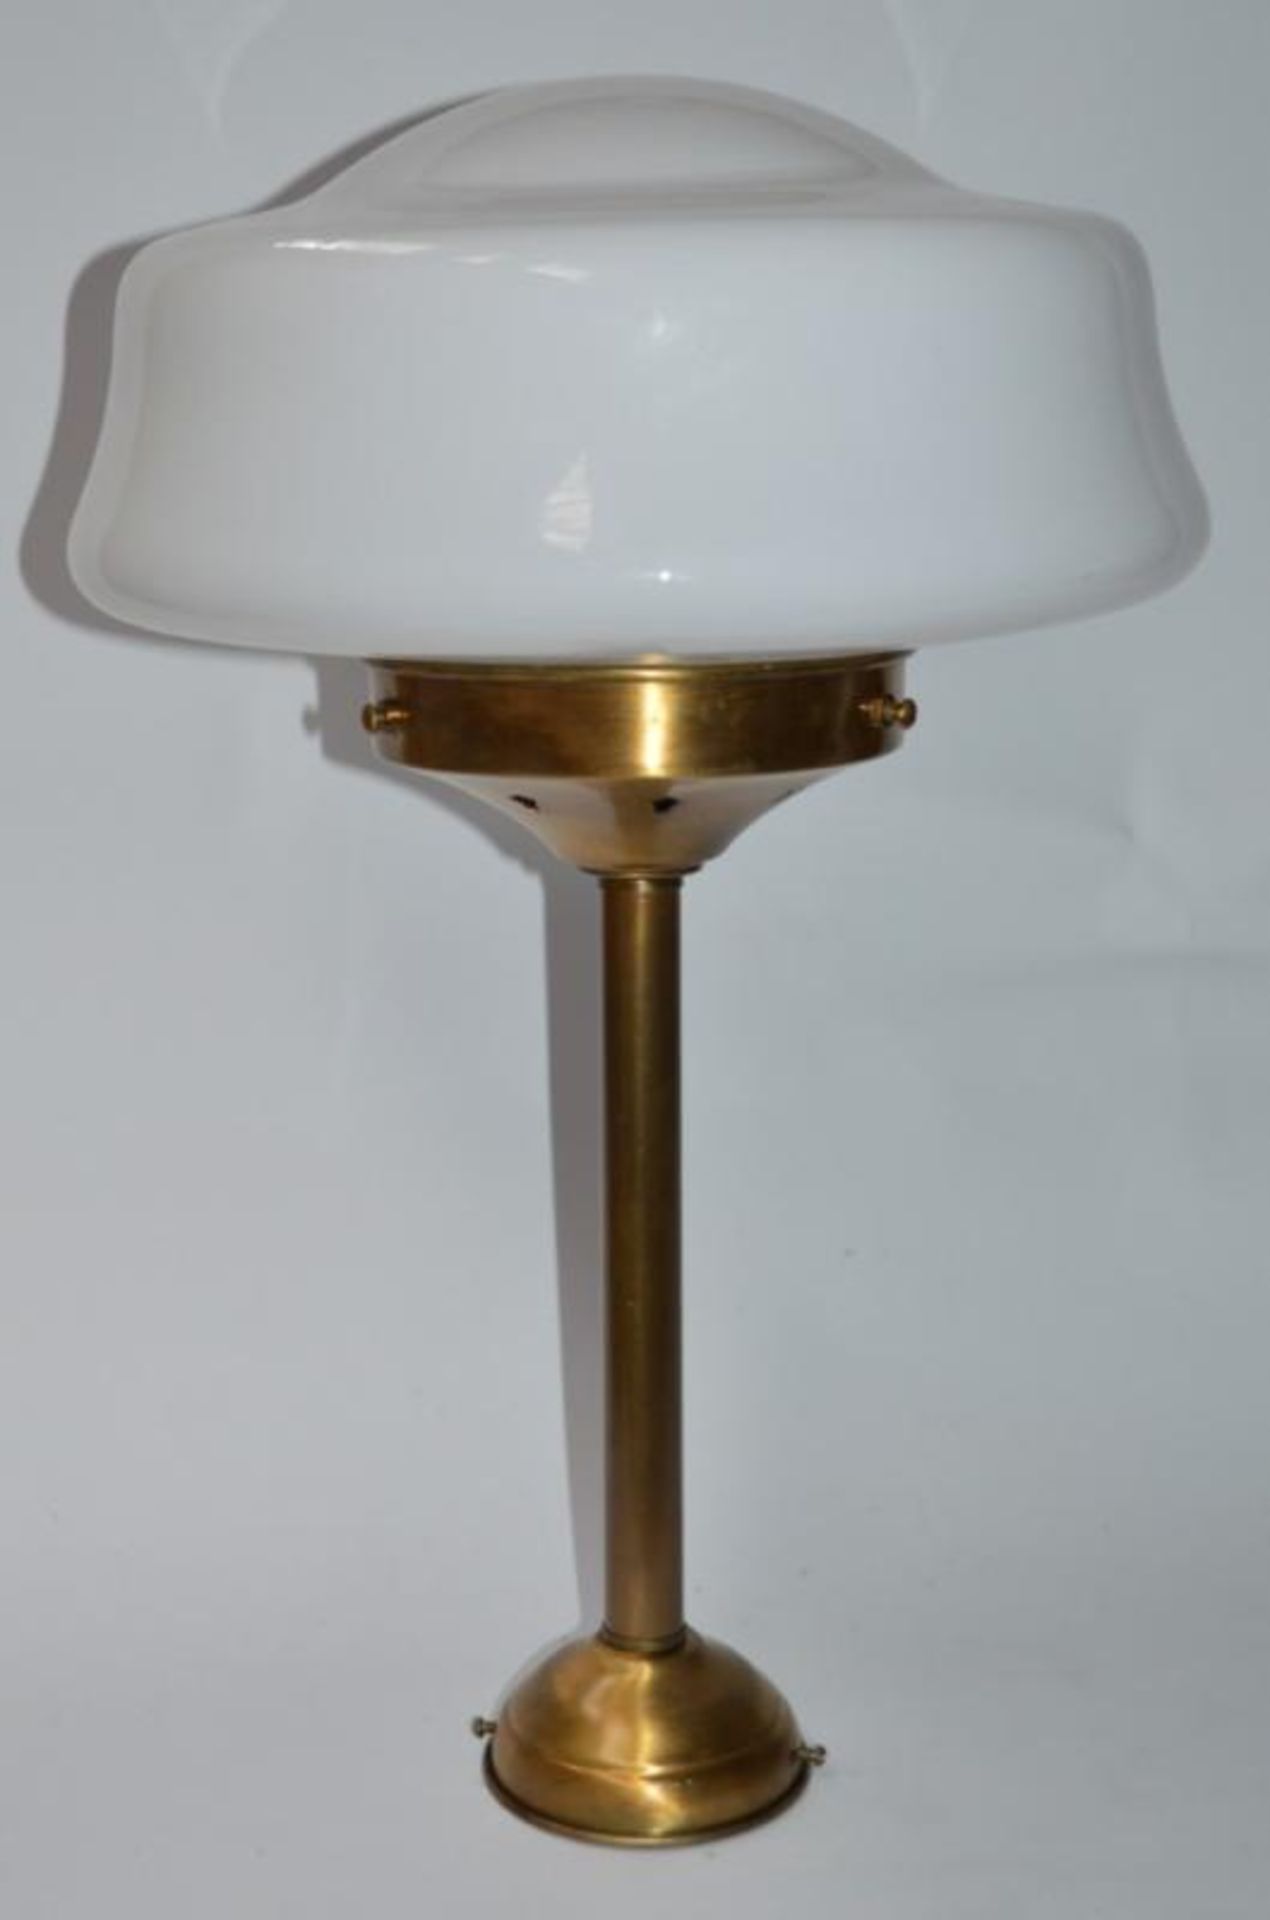 2 x Art Deco Style Lamps With Brass Bases and White Opal Glass Shades - Pair of - Suitable For Moun - Image 2 of 10